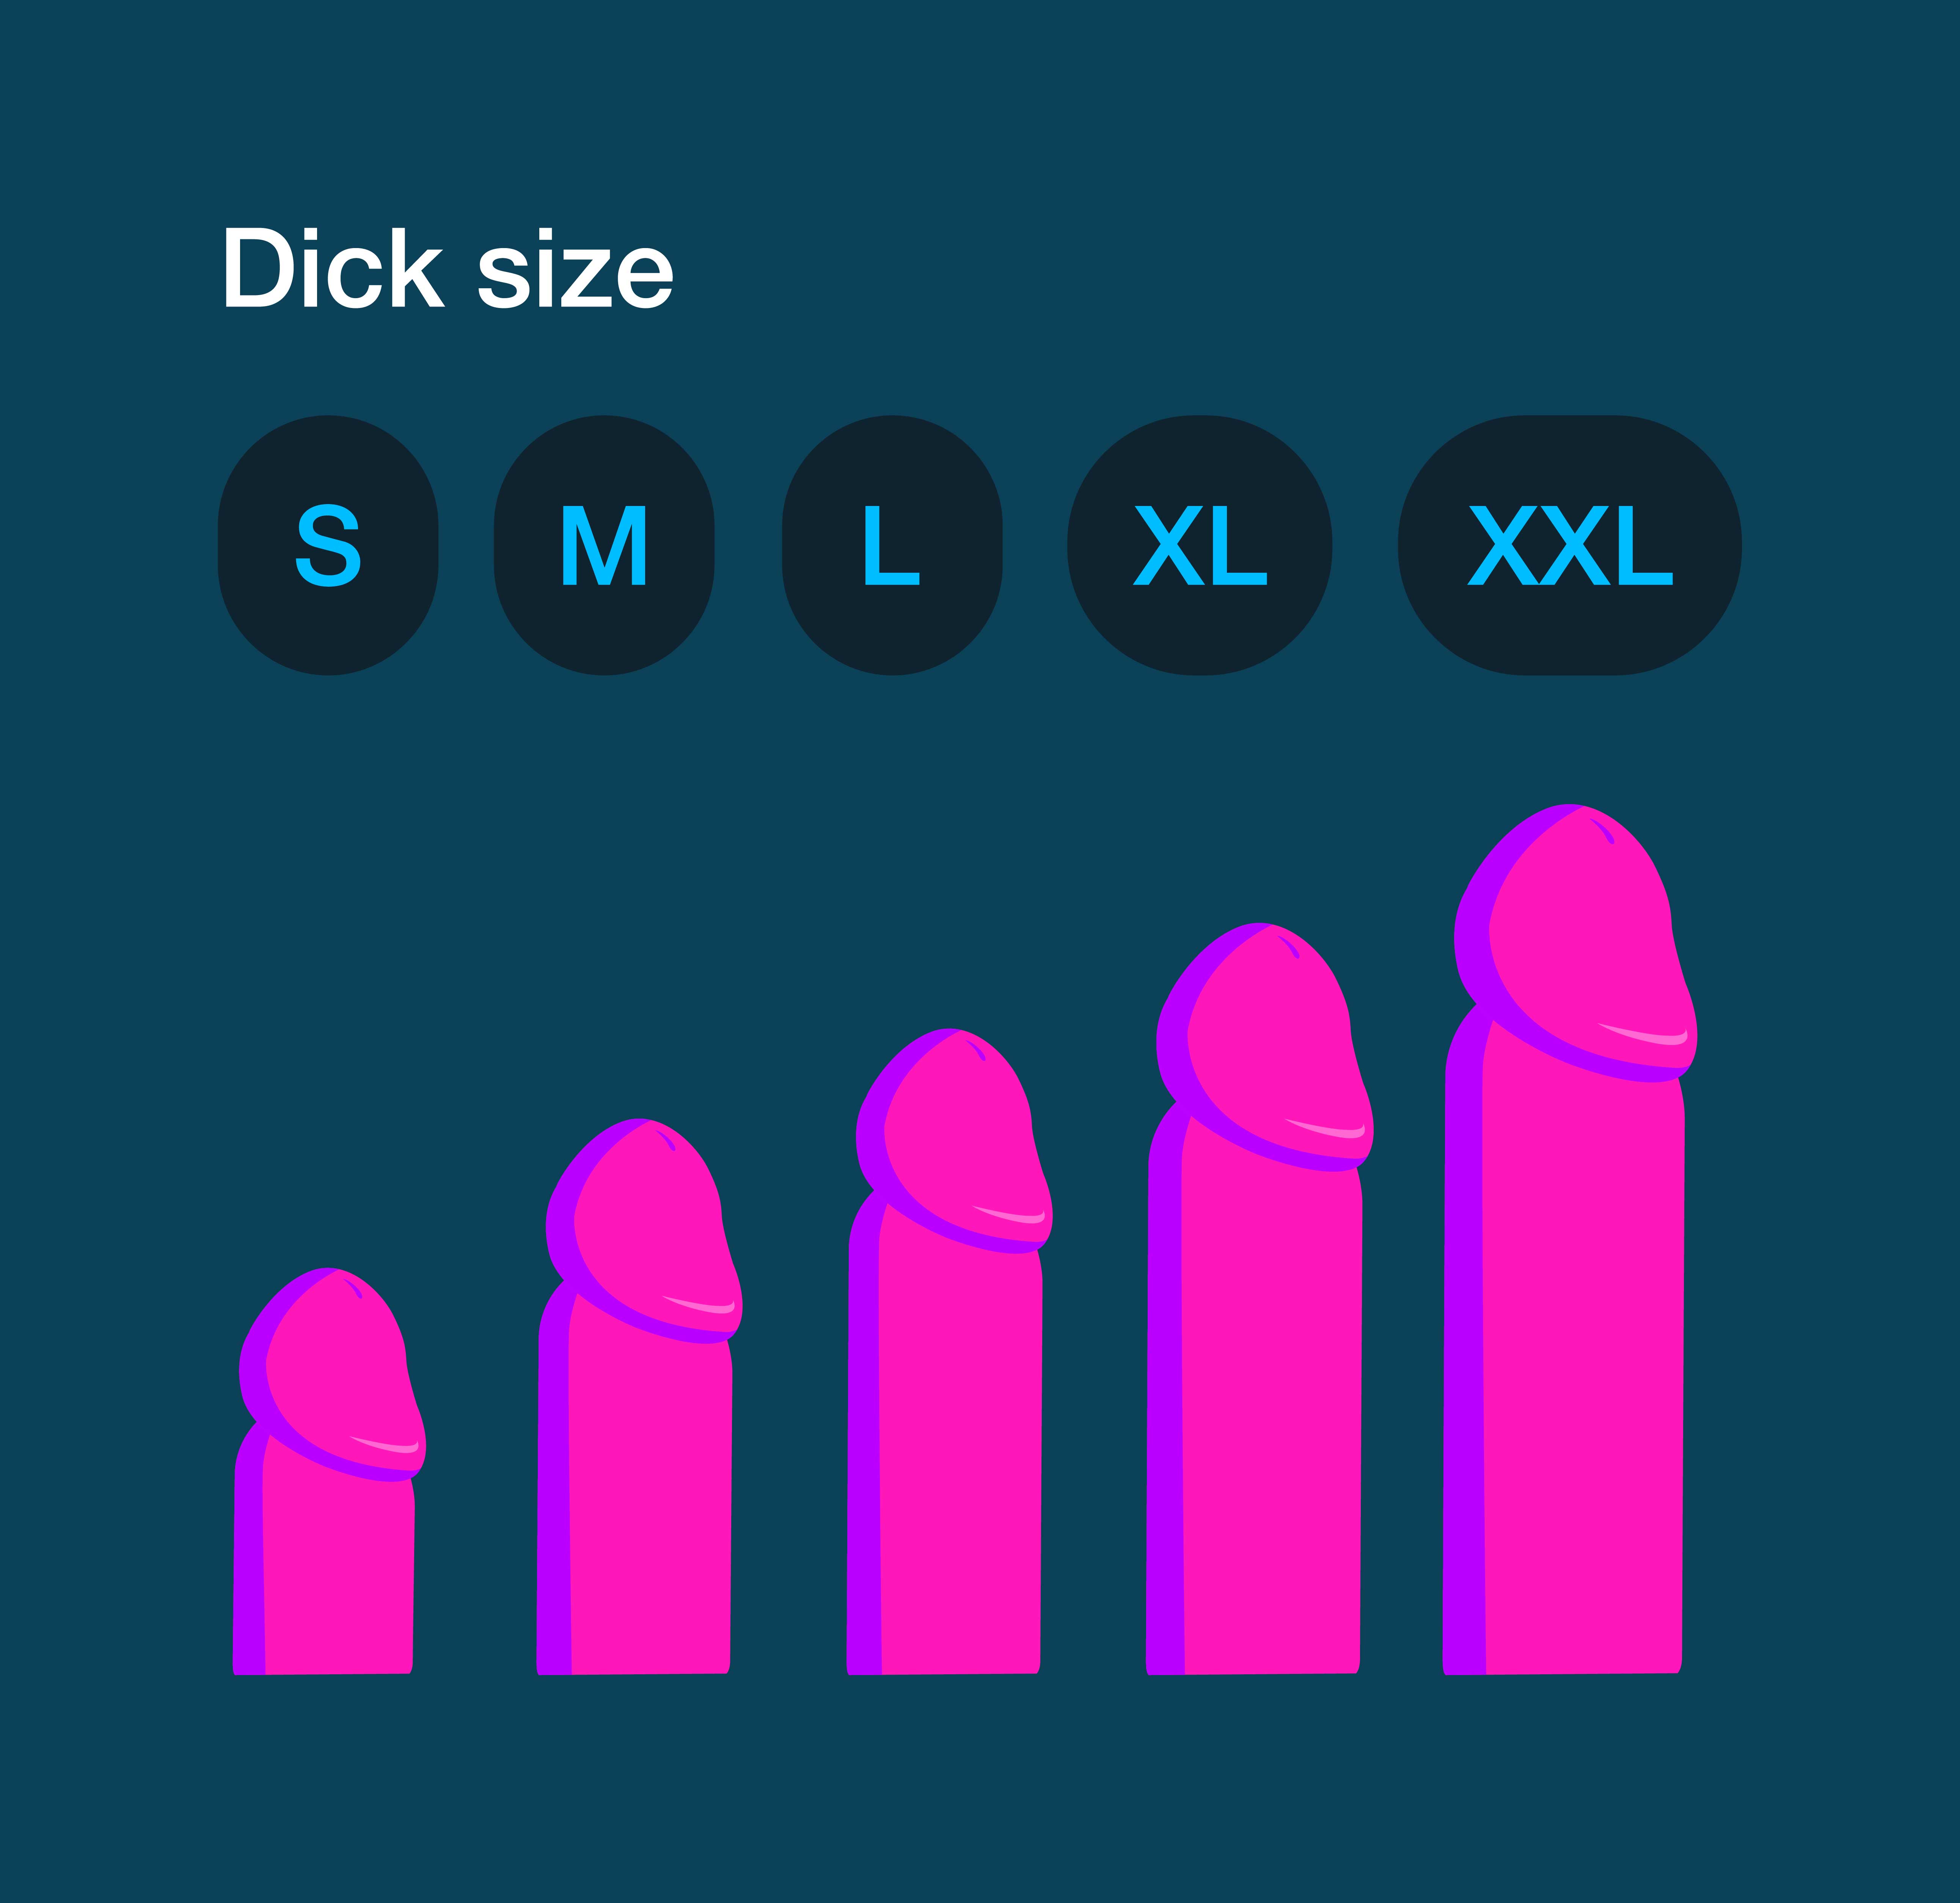 Dick sizes pictures